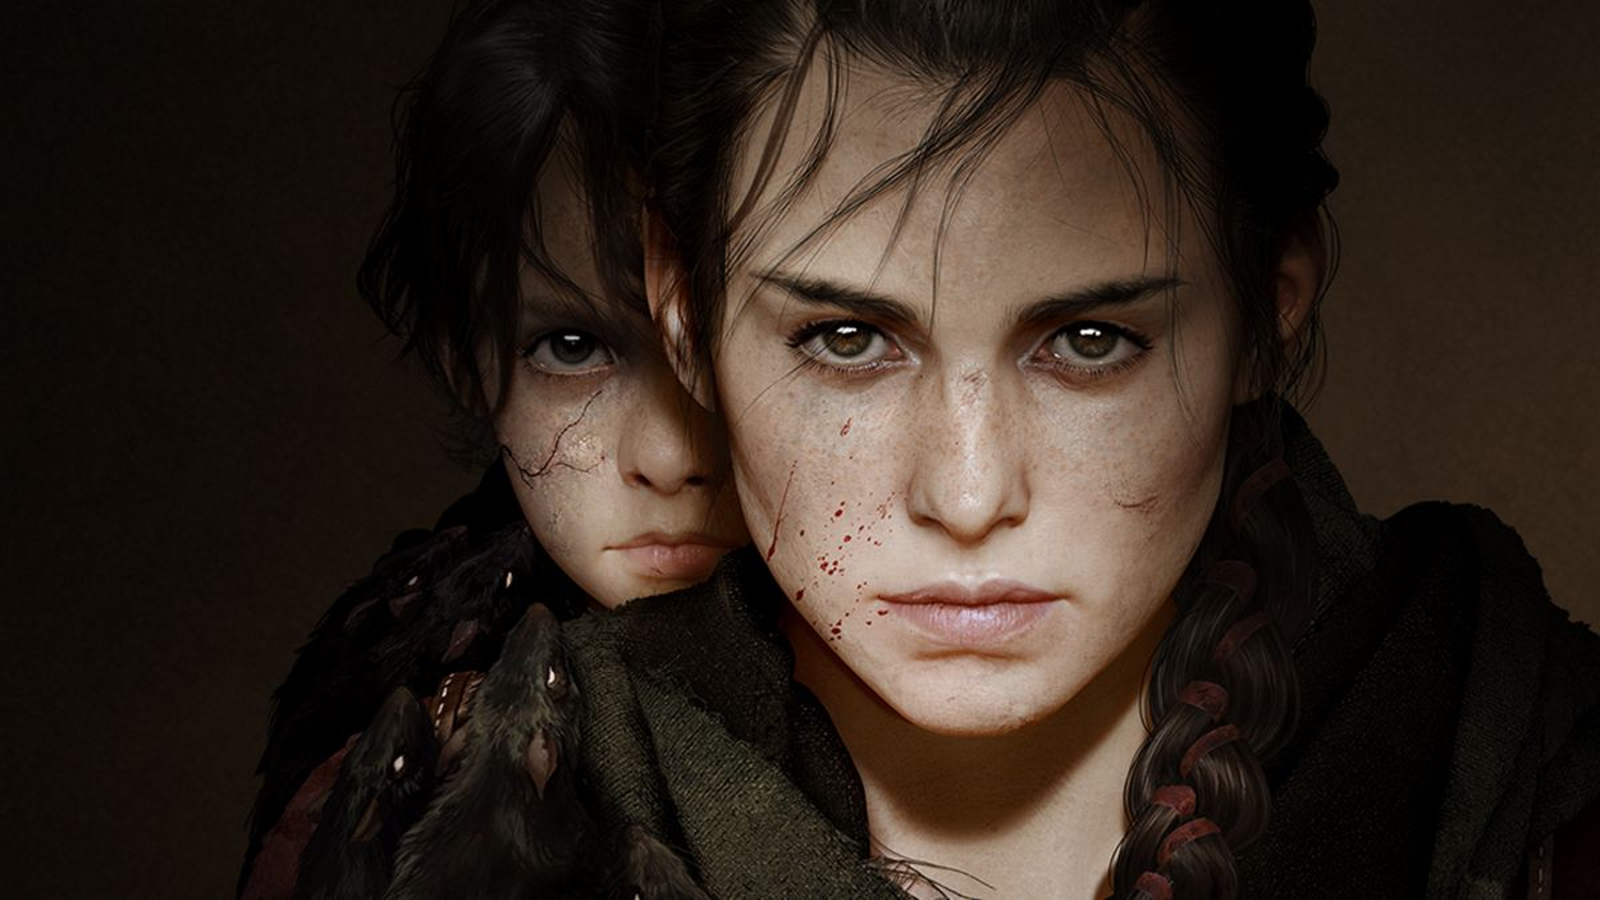 gamers don't die, they respawn — A PLAGUE TALE: REQUIEM